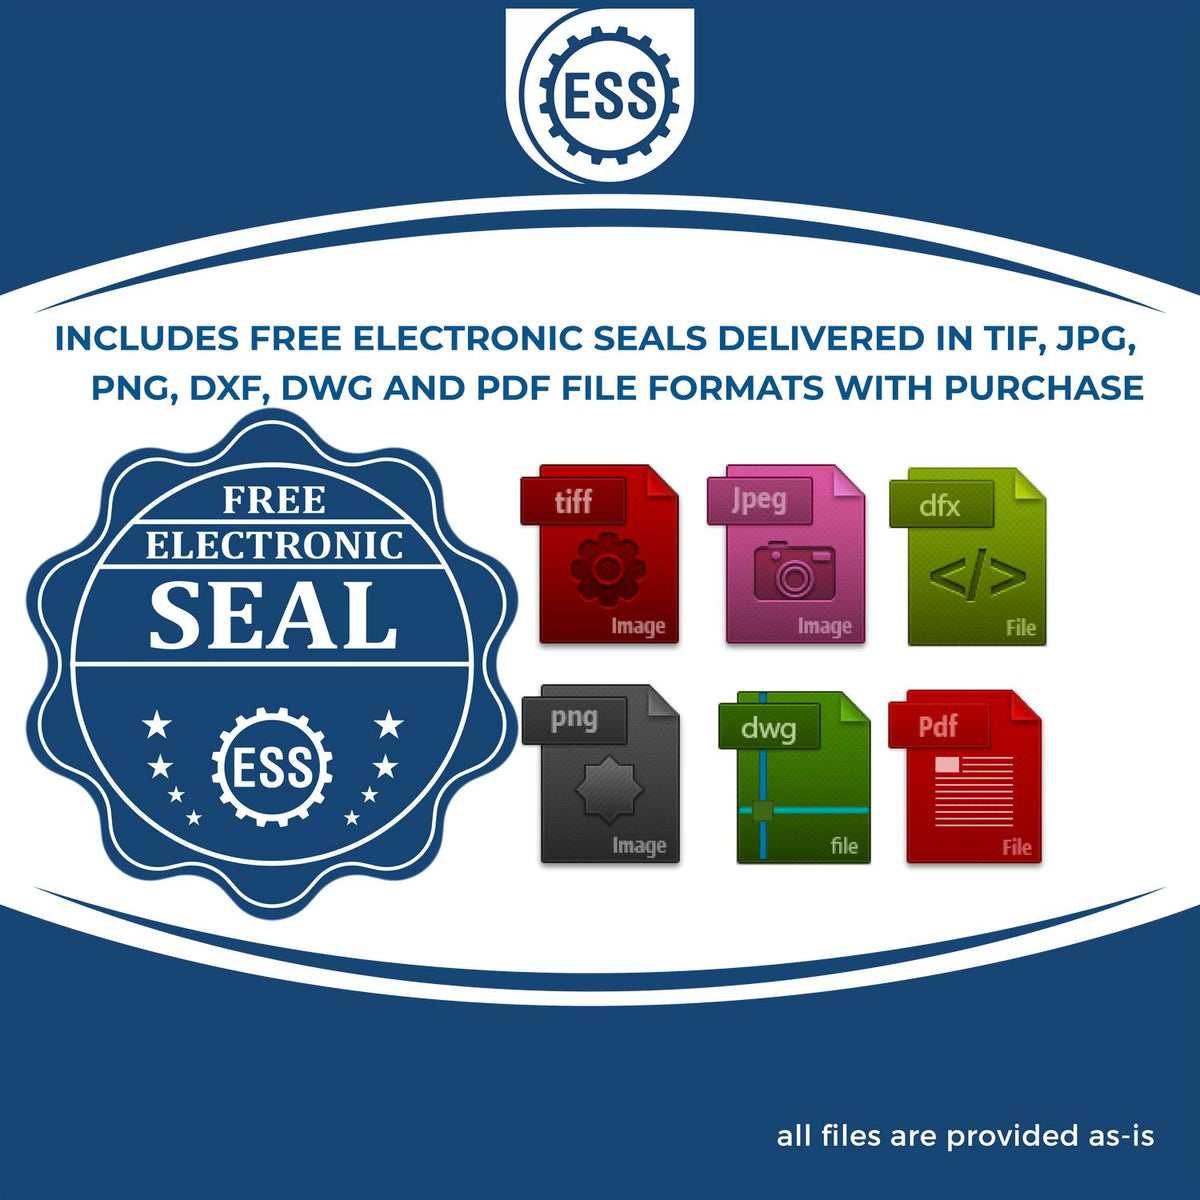 An infographic for the free electronic seal for the Hybrid New Mexico Geologist Seal illustrating the different file type icons such as DXF, DWG, TIF, JPG and PNG.